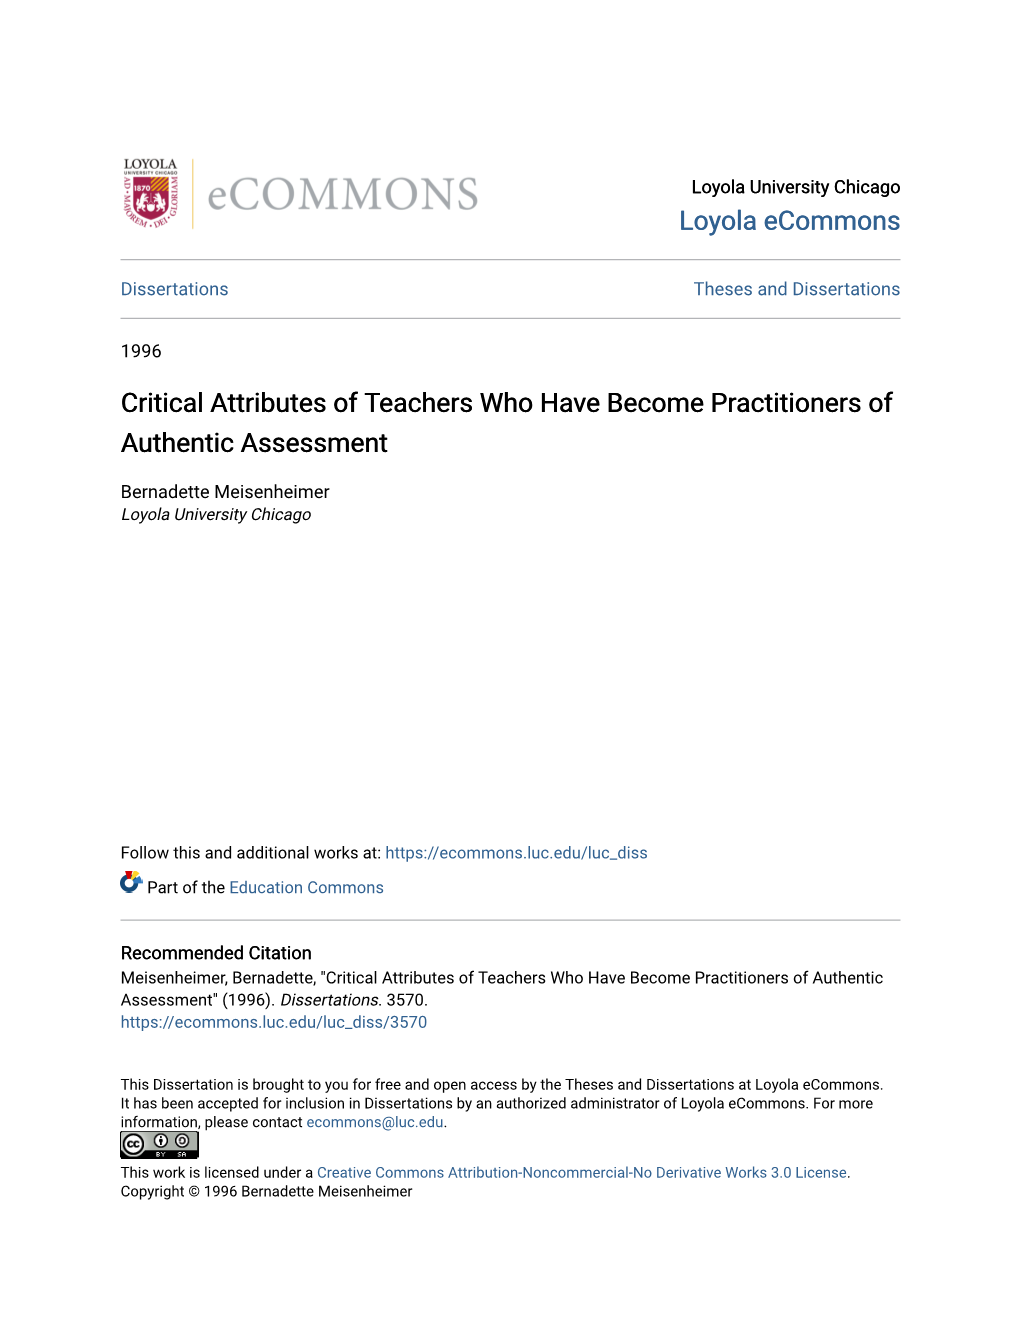 Critical Attributes of Teachers Who Have Become Practitioners of Authentic Assessment